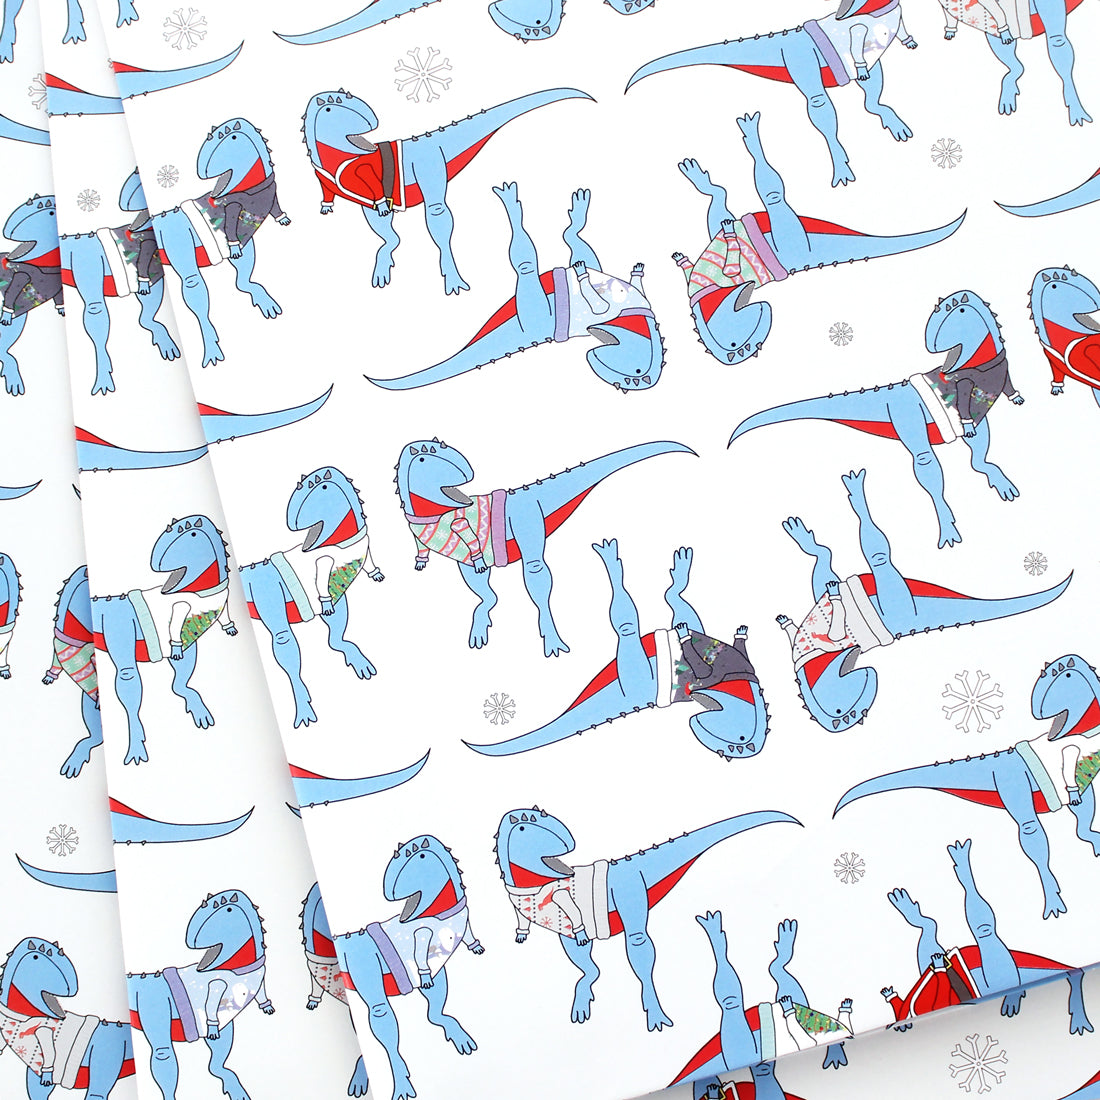 3 sheets of Dinosaur Ugly Christmas Jumper Wrapping Paper fanned out